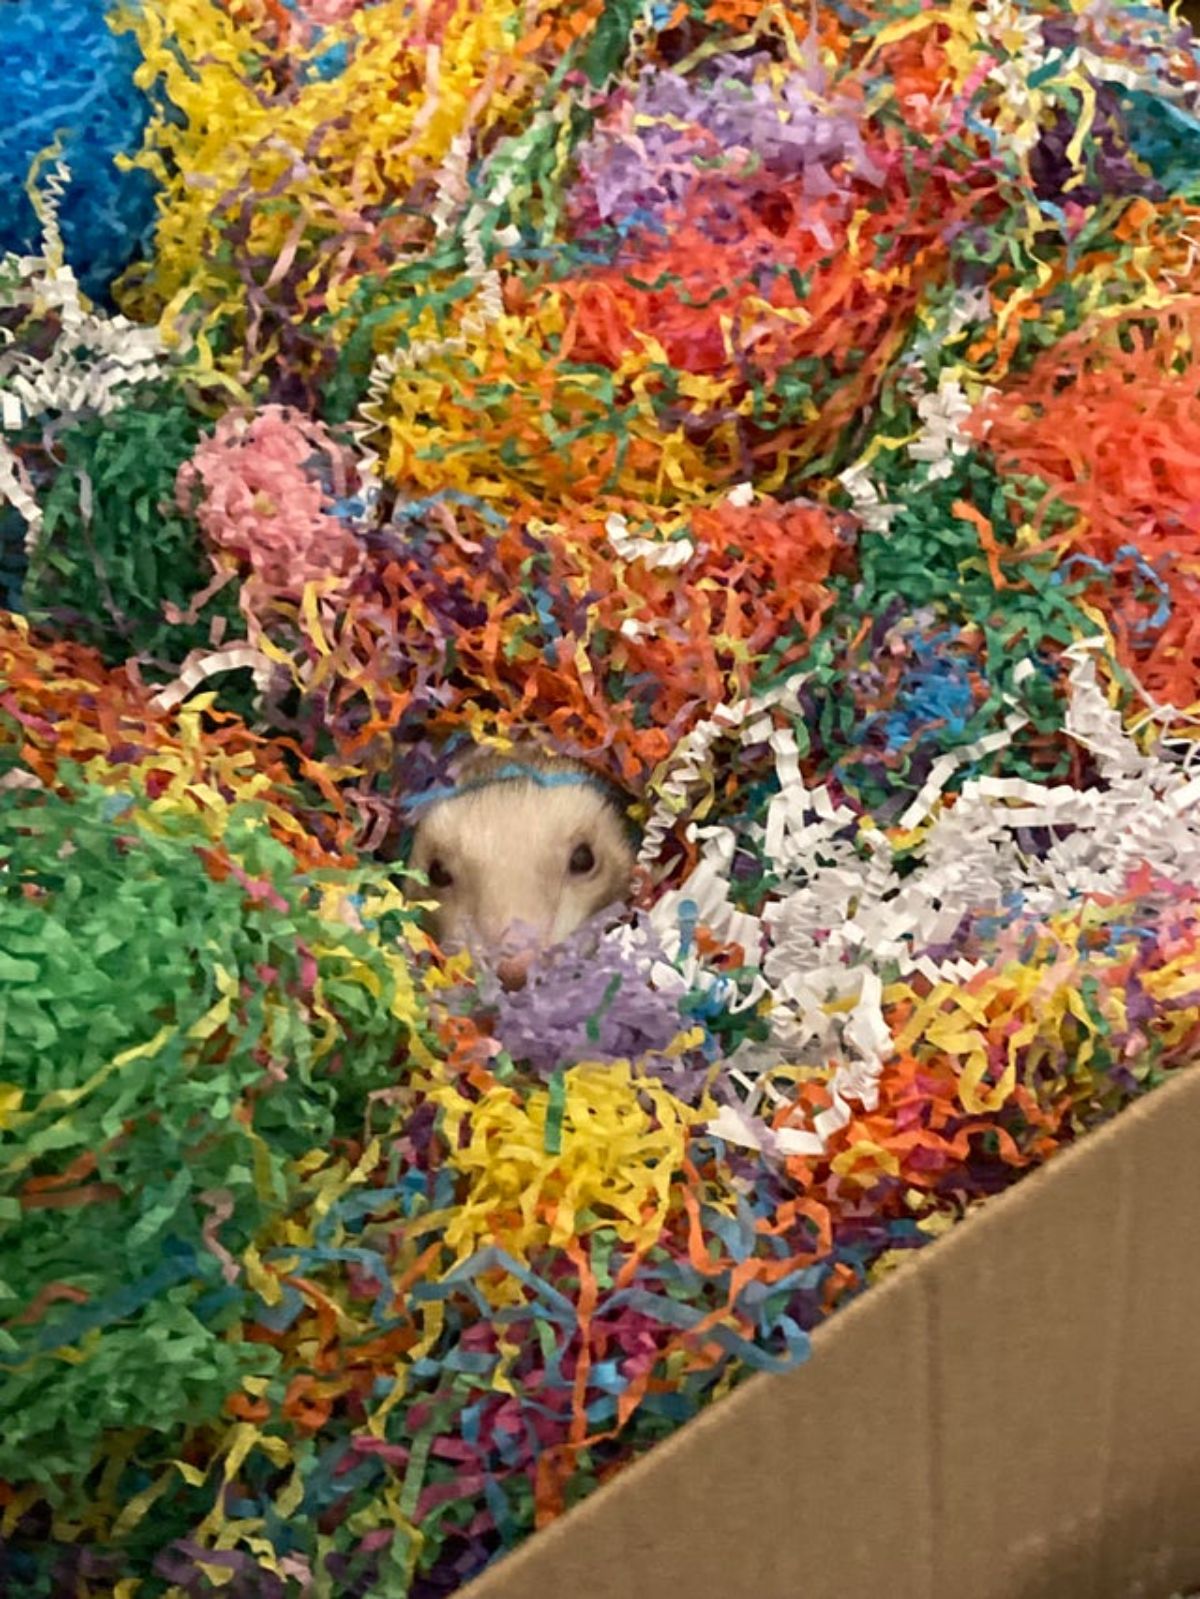 black and white ferret hidden between a lot of multi-coloured crepe paper strips in a cardboard box